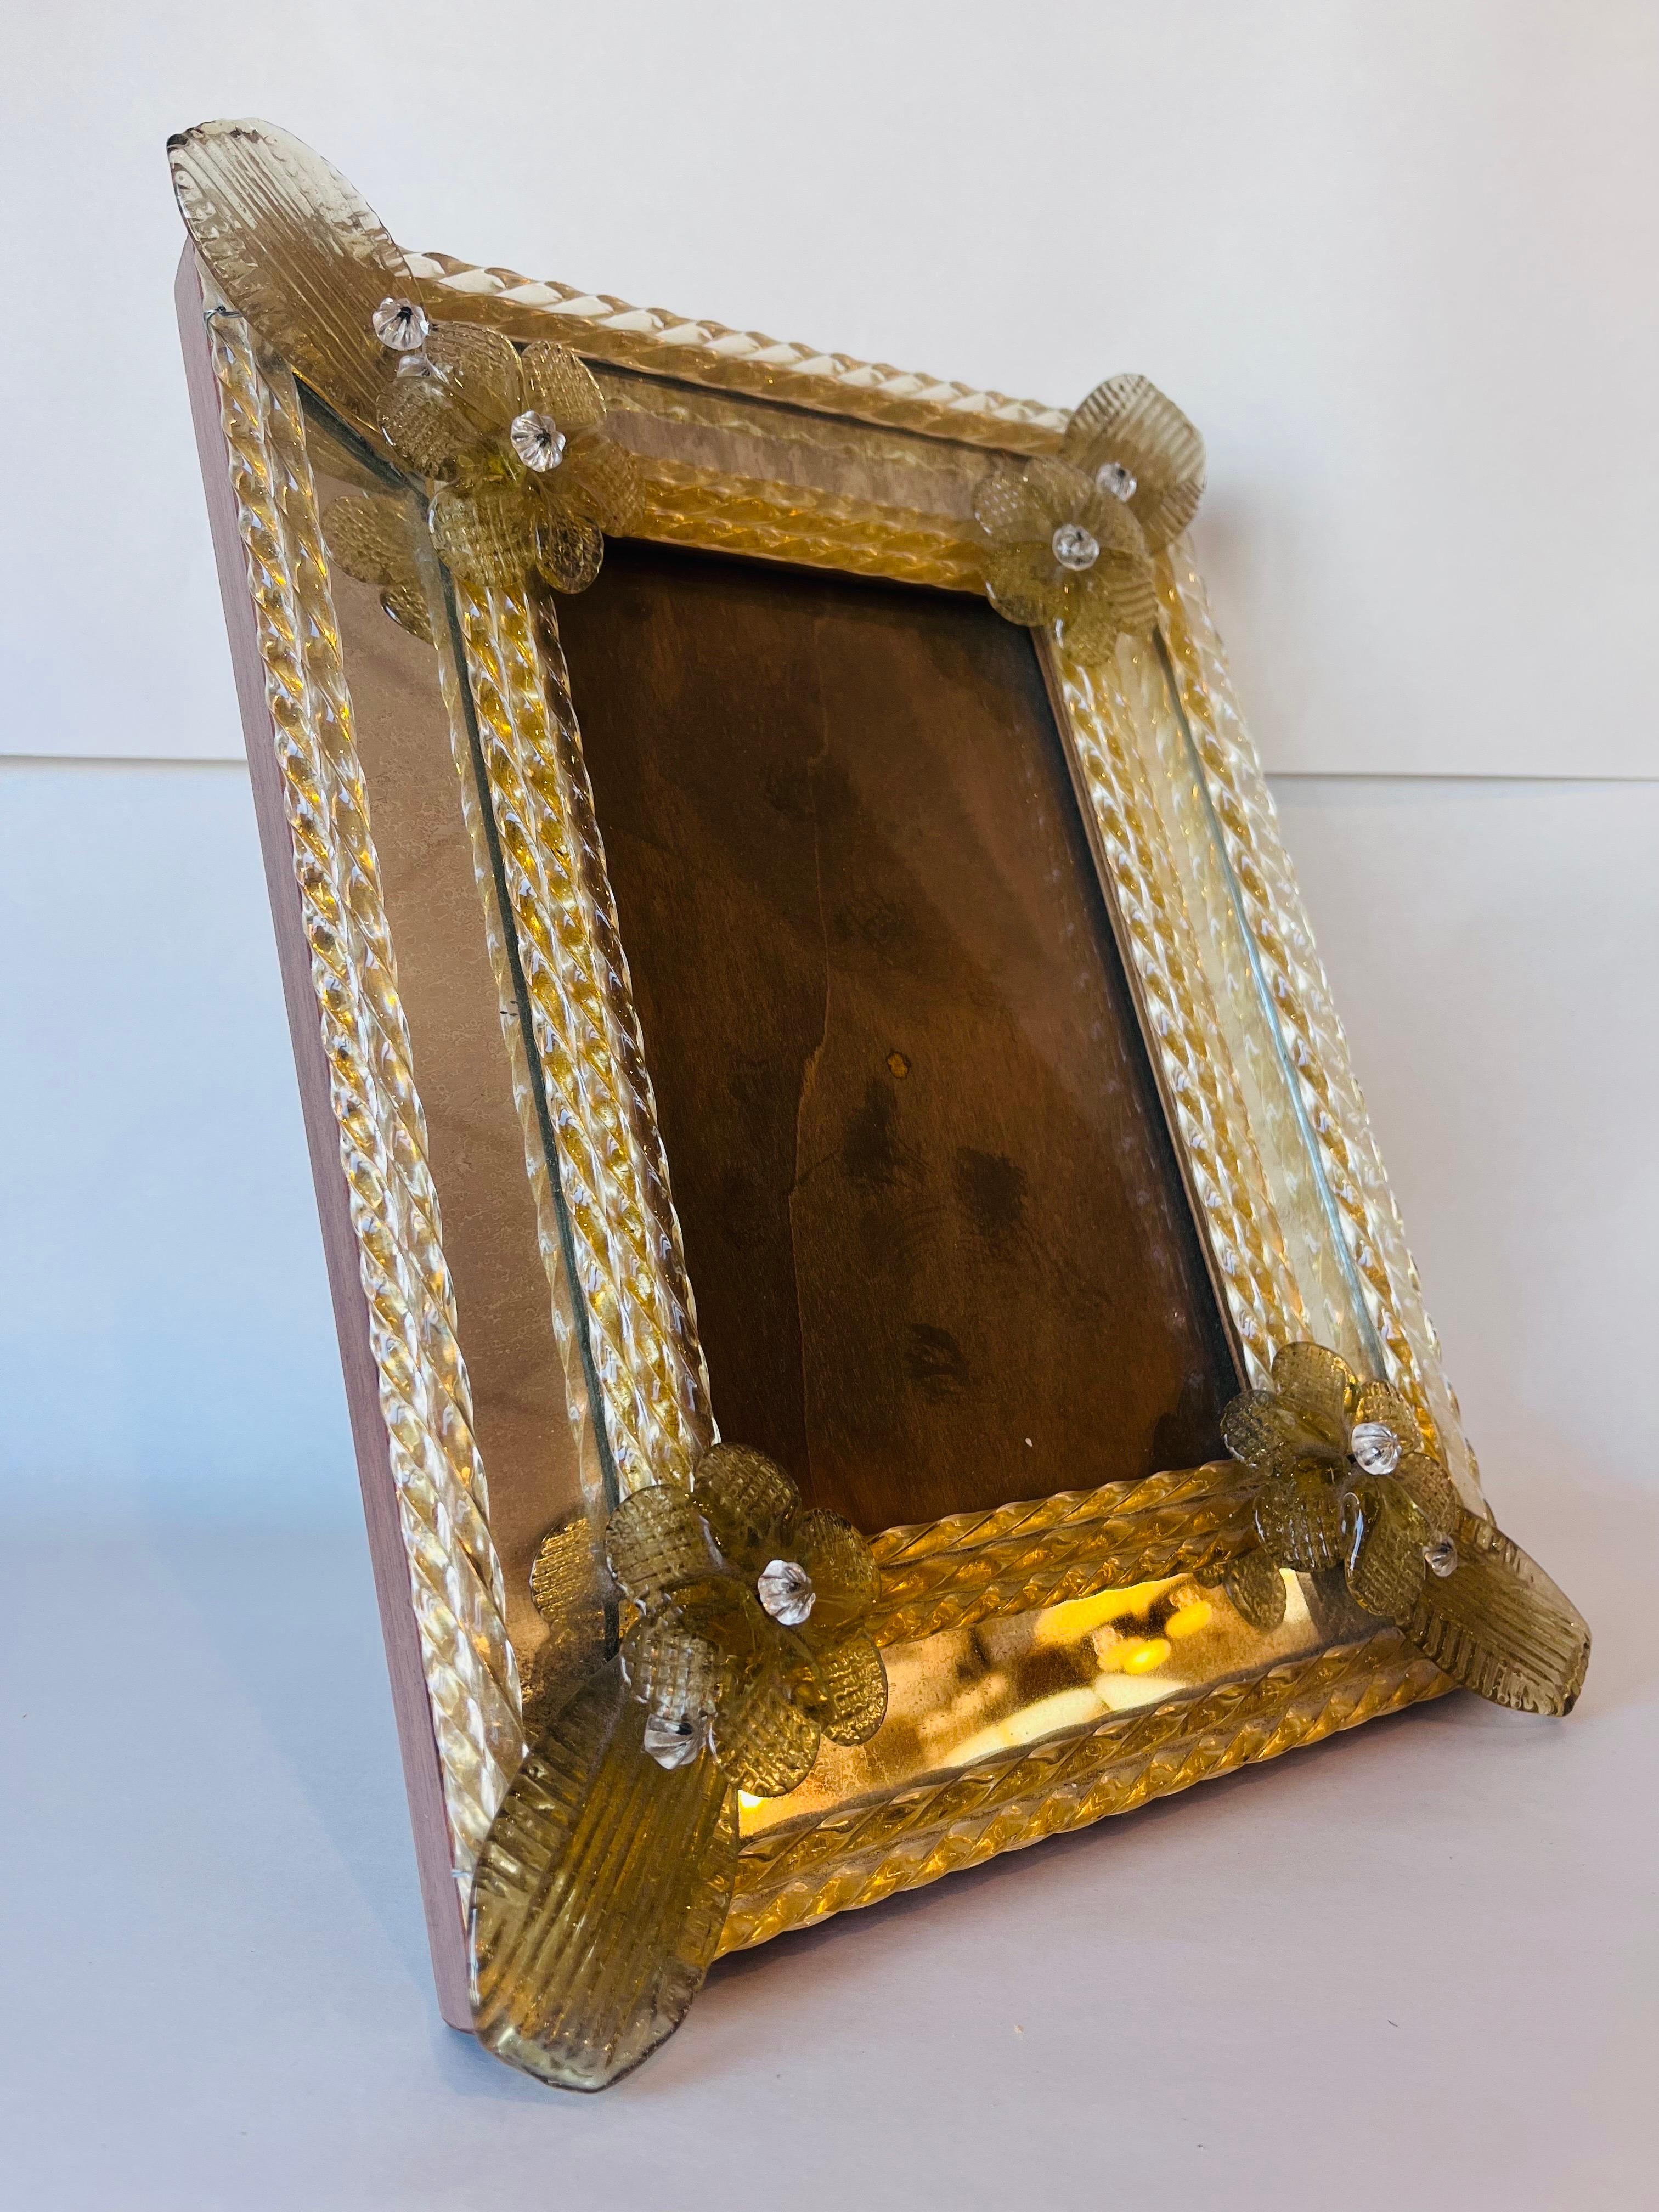 Ornate Venetian Murano Glass Picture or Photograph Frame Desk or Table Accessory 11